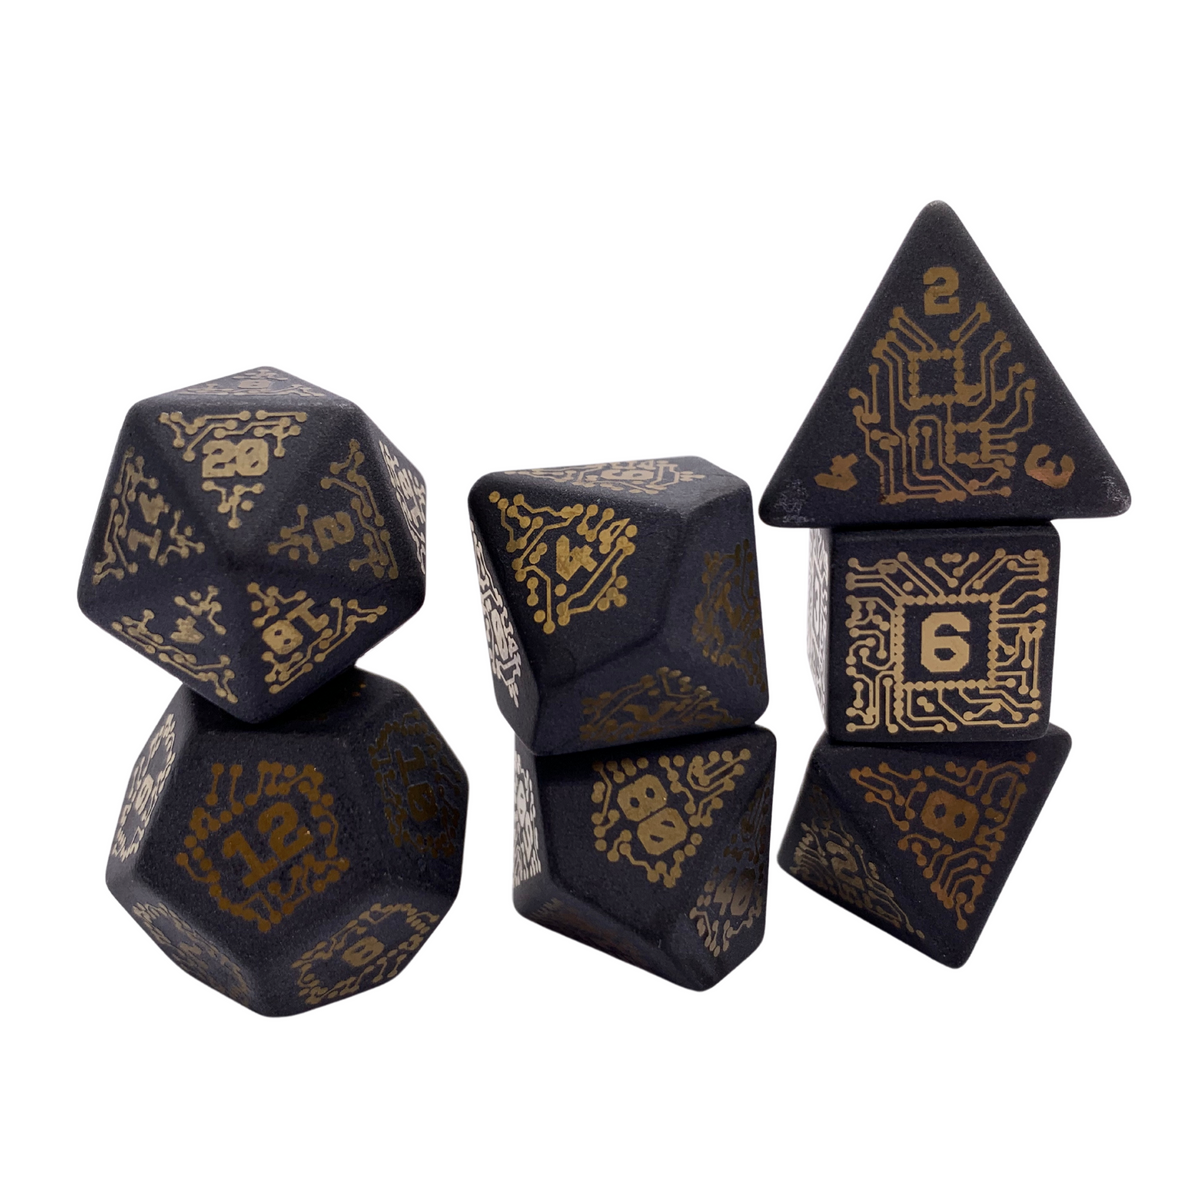 Level Up Dice - Gold Ionized Chip Obsidian